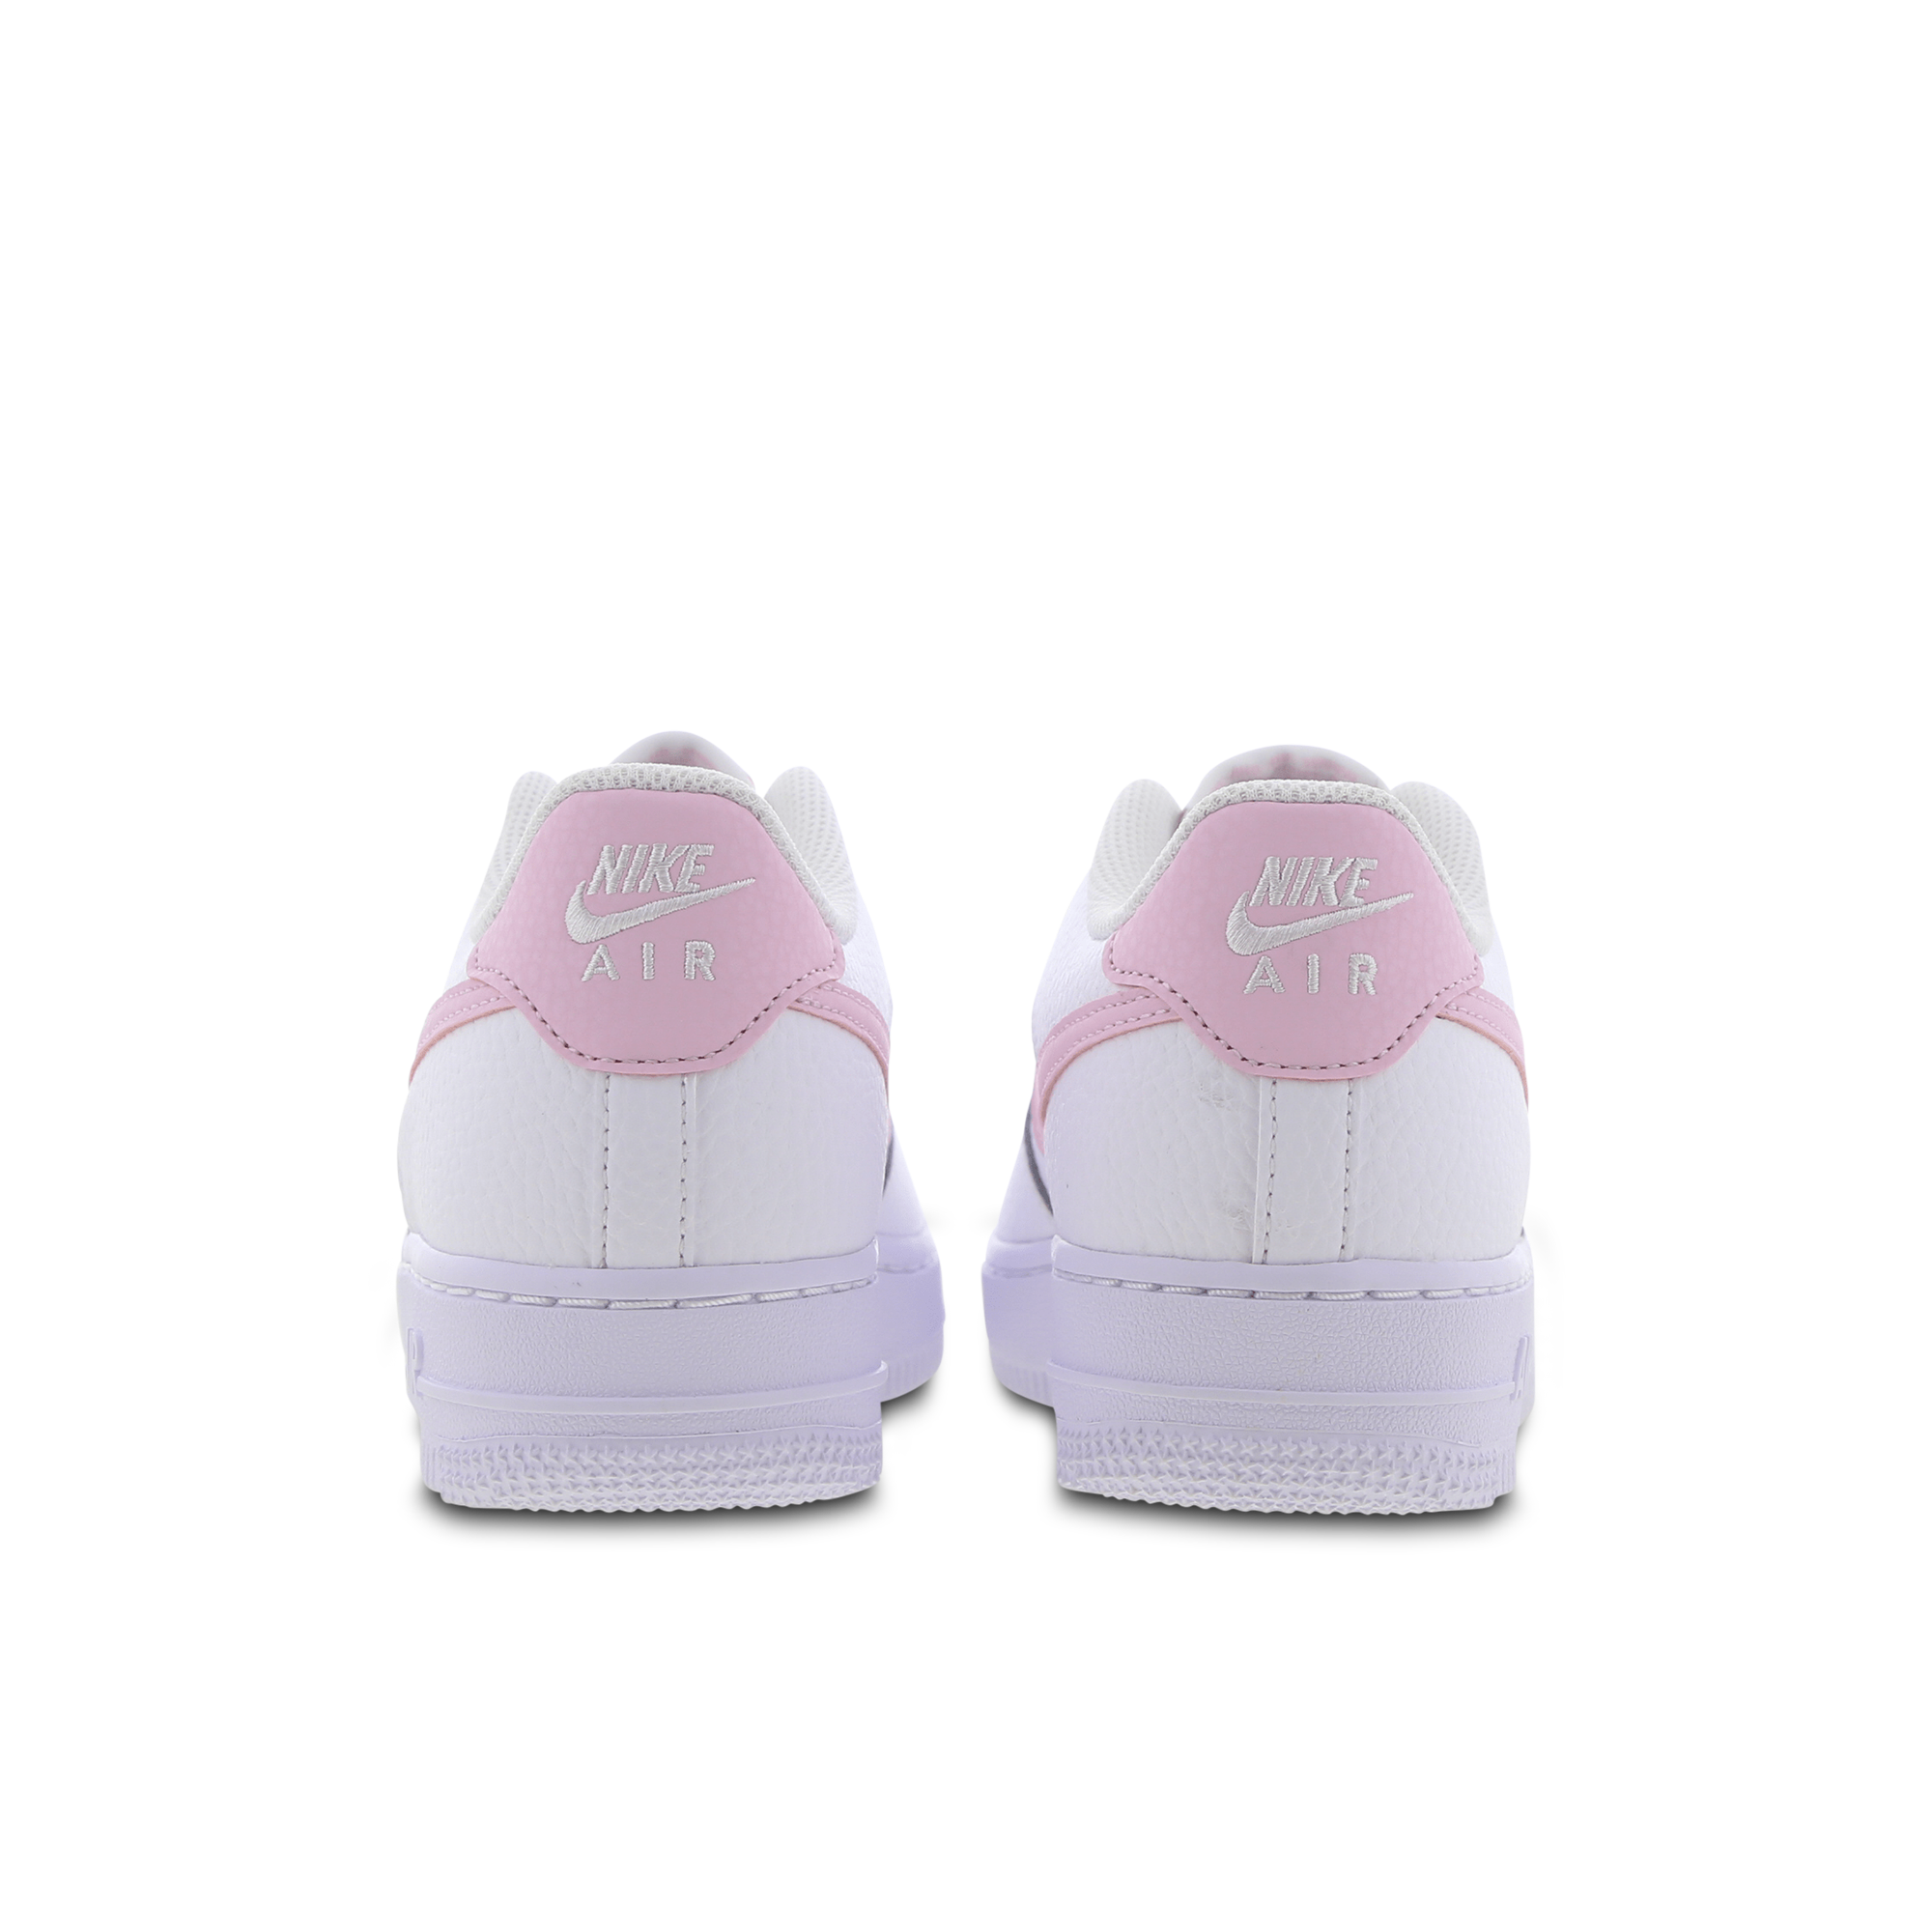 Double Boxed  89.99 Nike Air Force 1 White Pink Foam Double Boxed